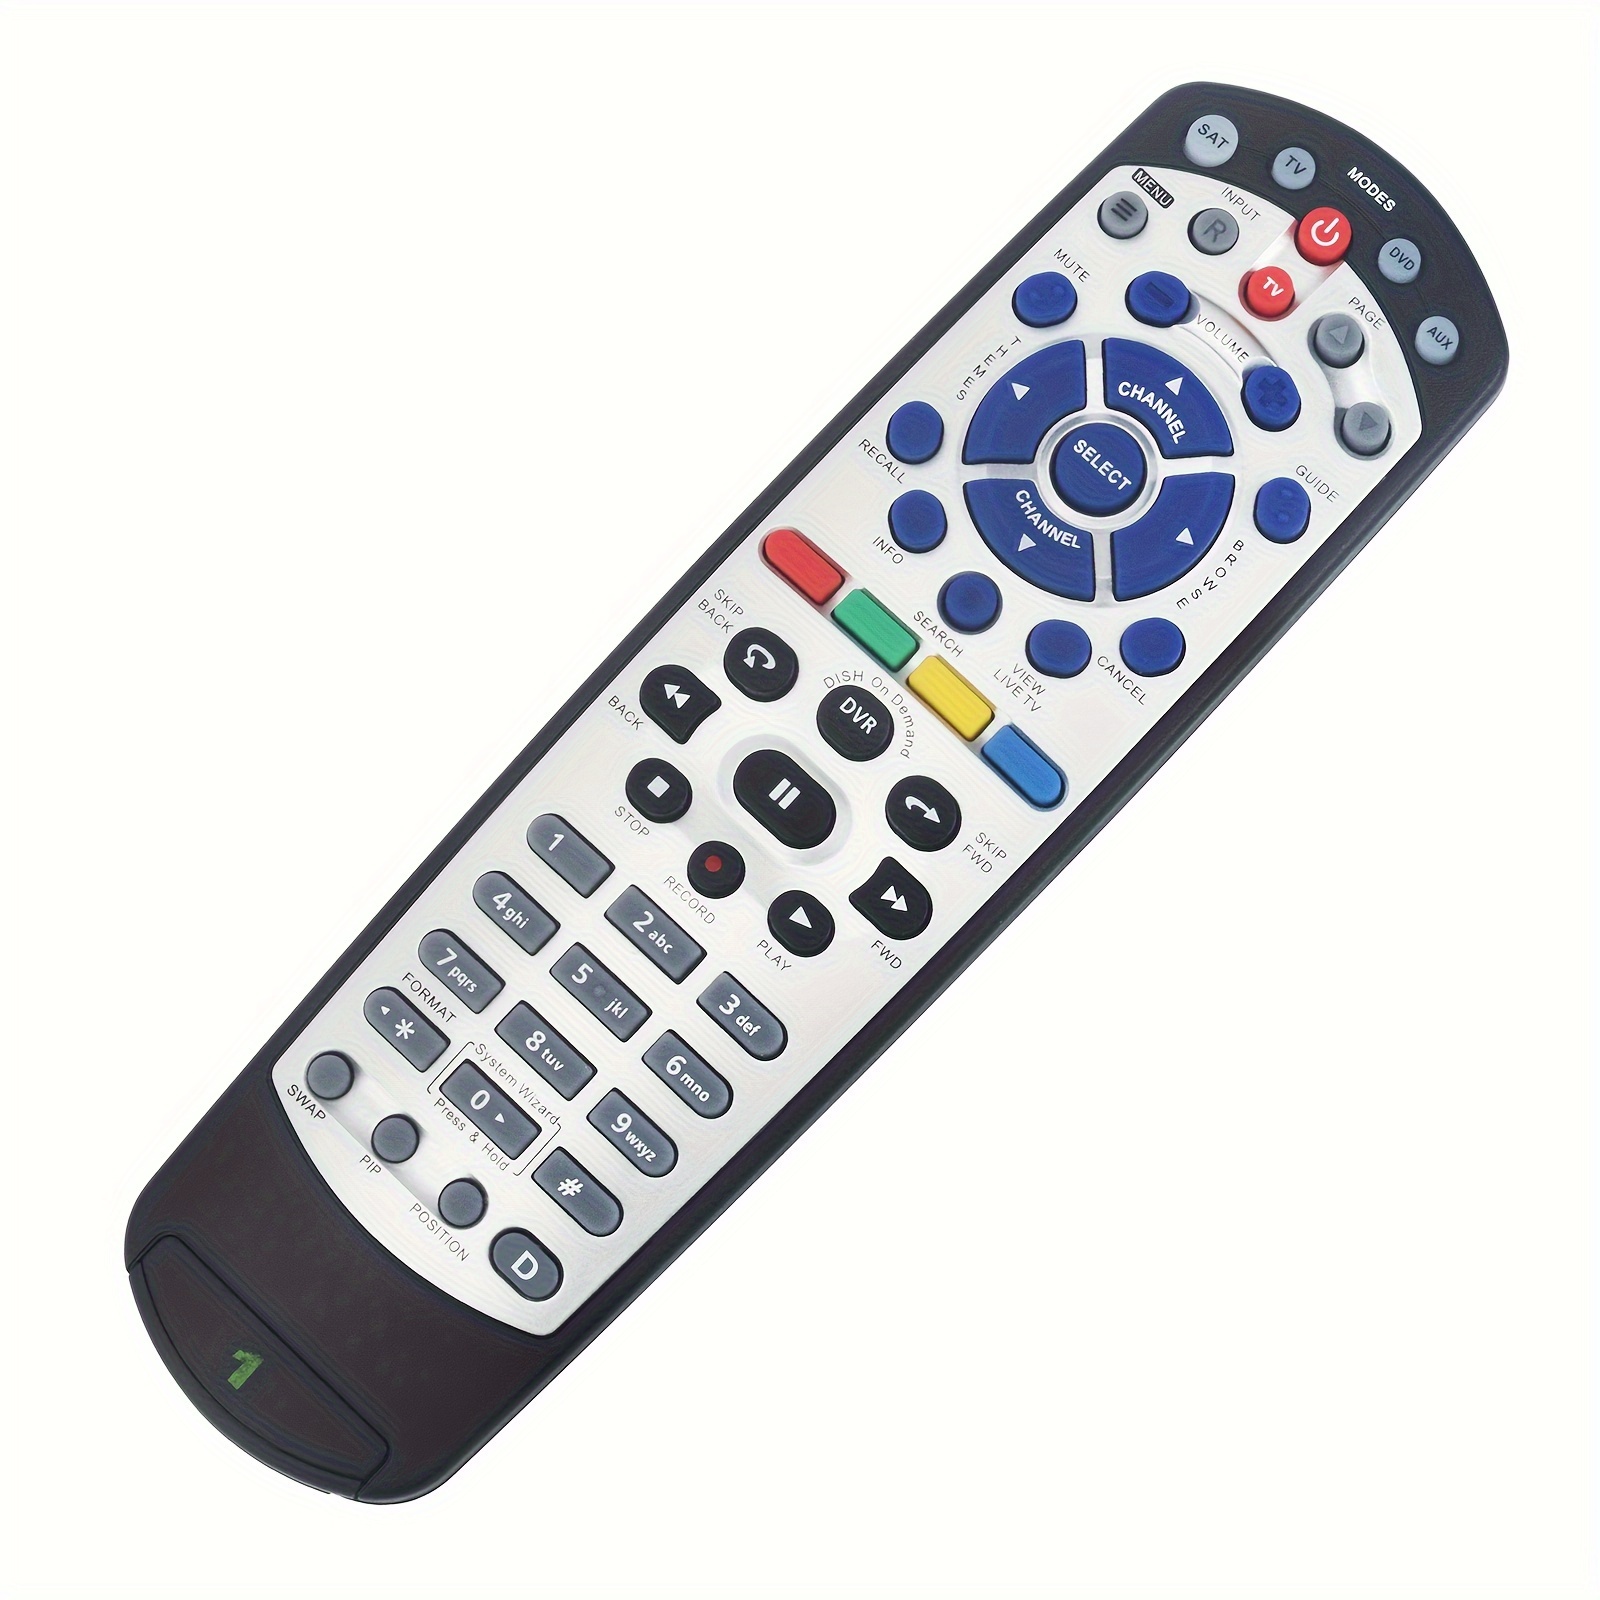 

New Replacement Remote Control Compatible With Dsh Network 21.1 Ir Uhf Pro 20.0 21.0 Remote Control Replacement Fit For 21.1 Ir Uhf 20.0 21.0 Pro Tv Satellite Receiver